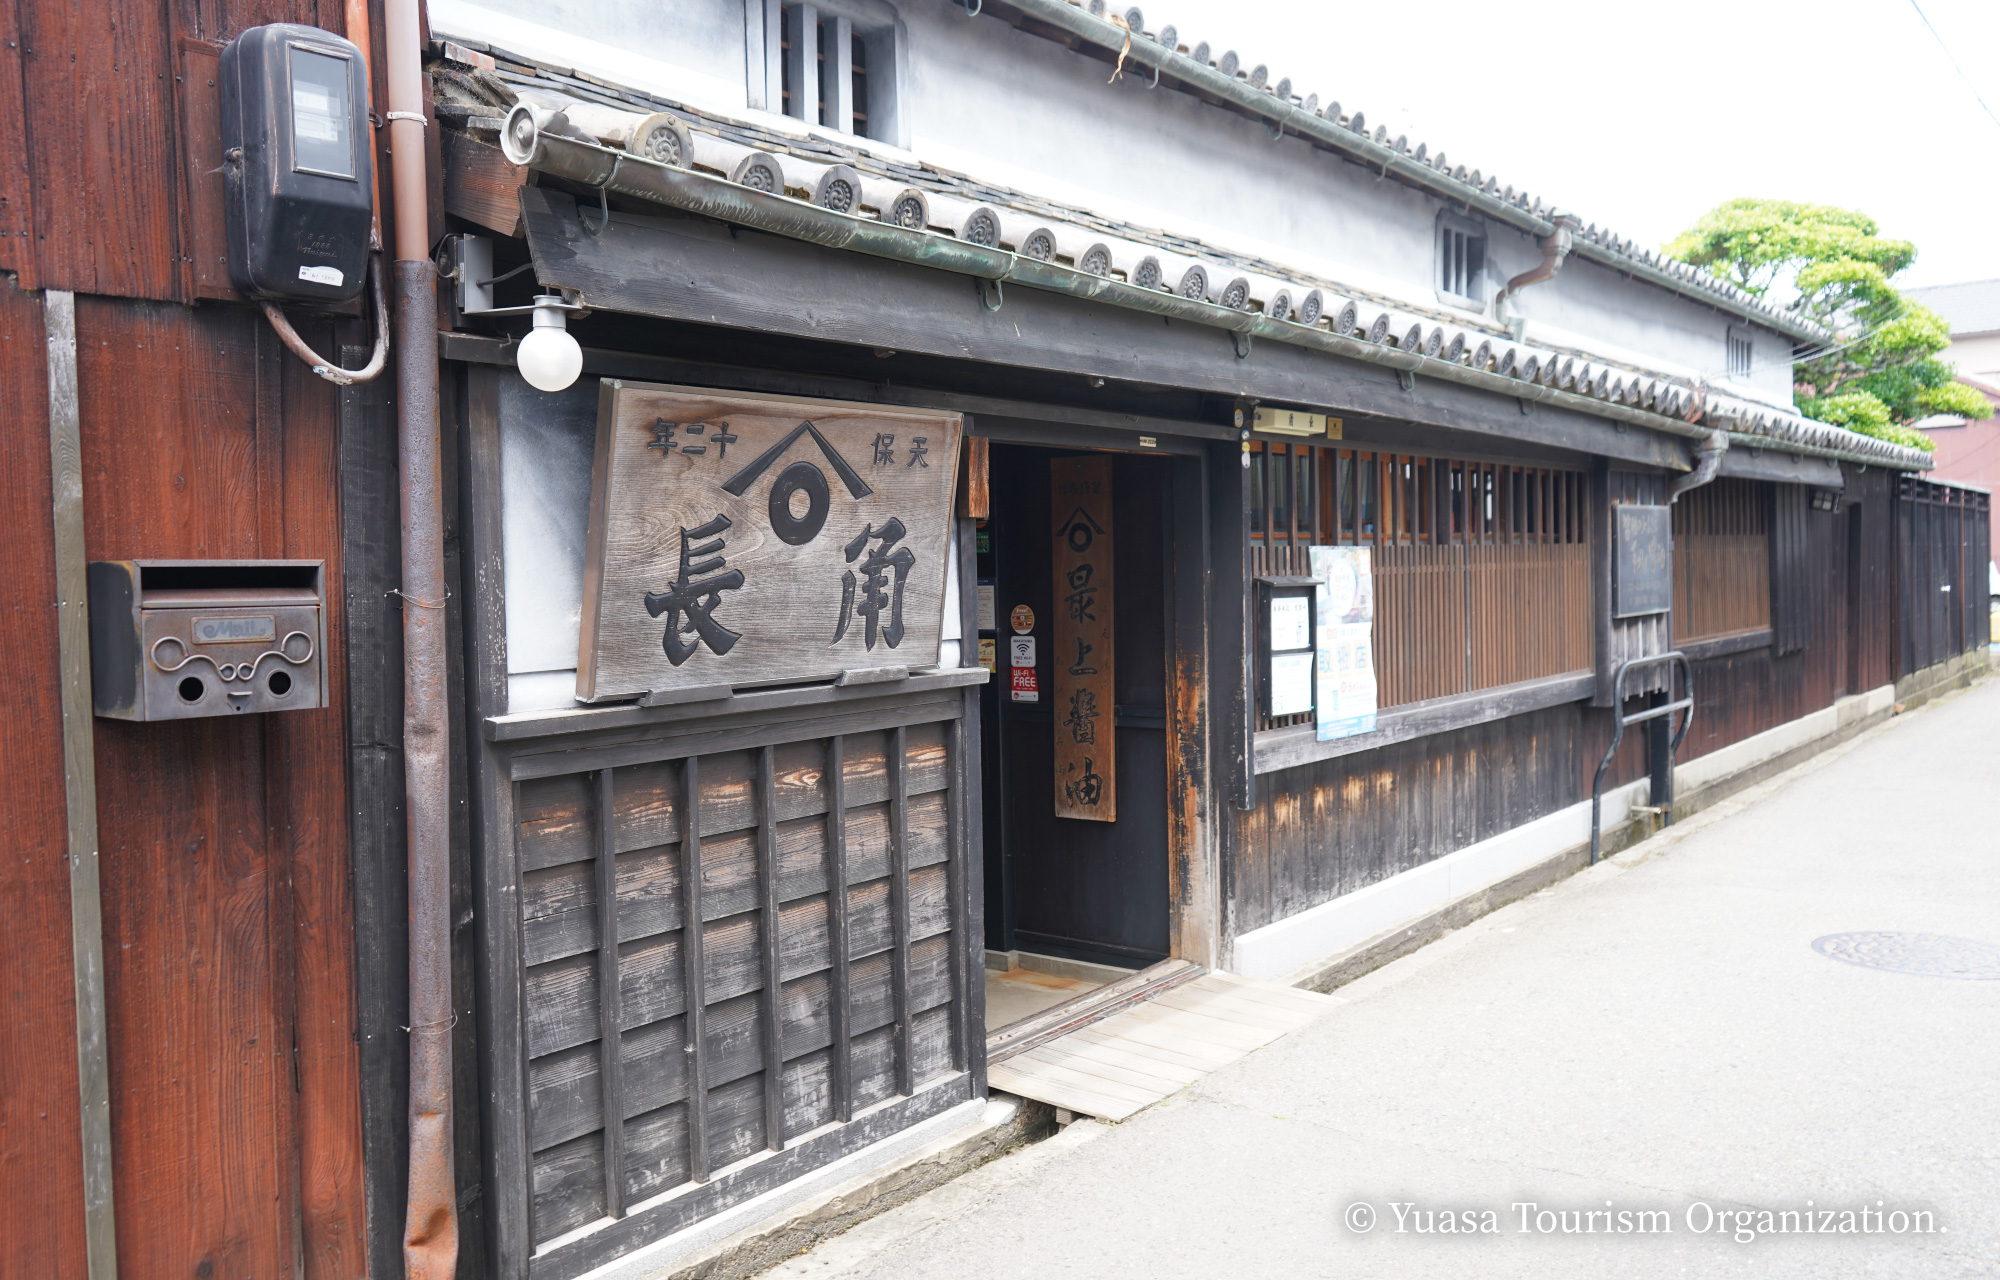 Yuasa Town (Preservation District for Groups of Traditional Buildings)